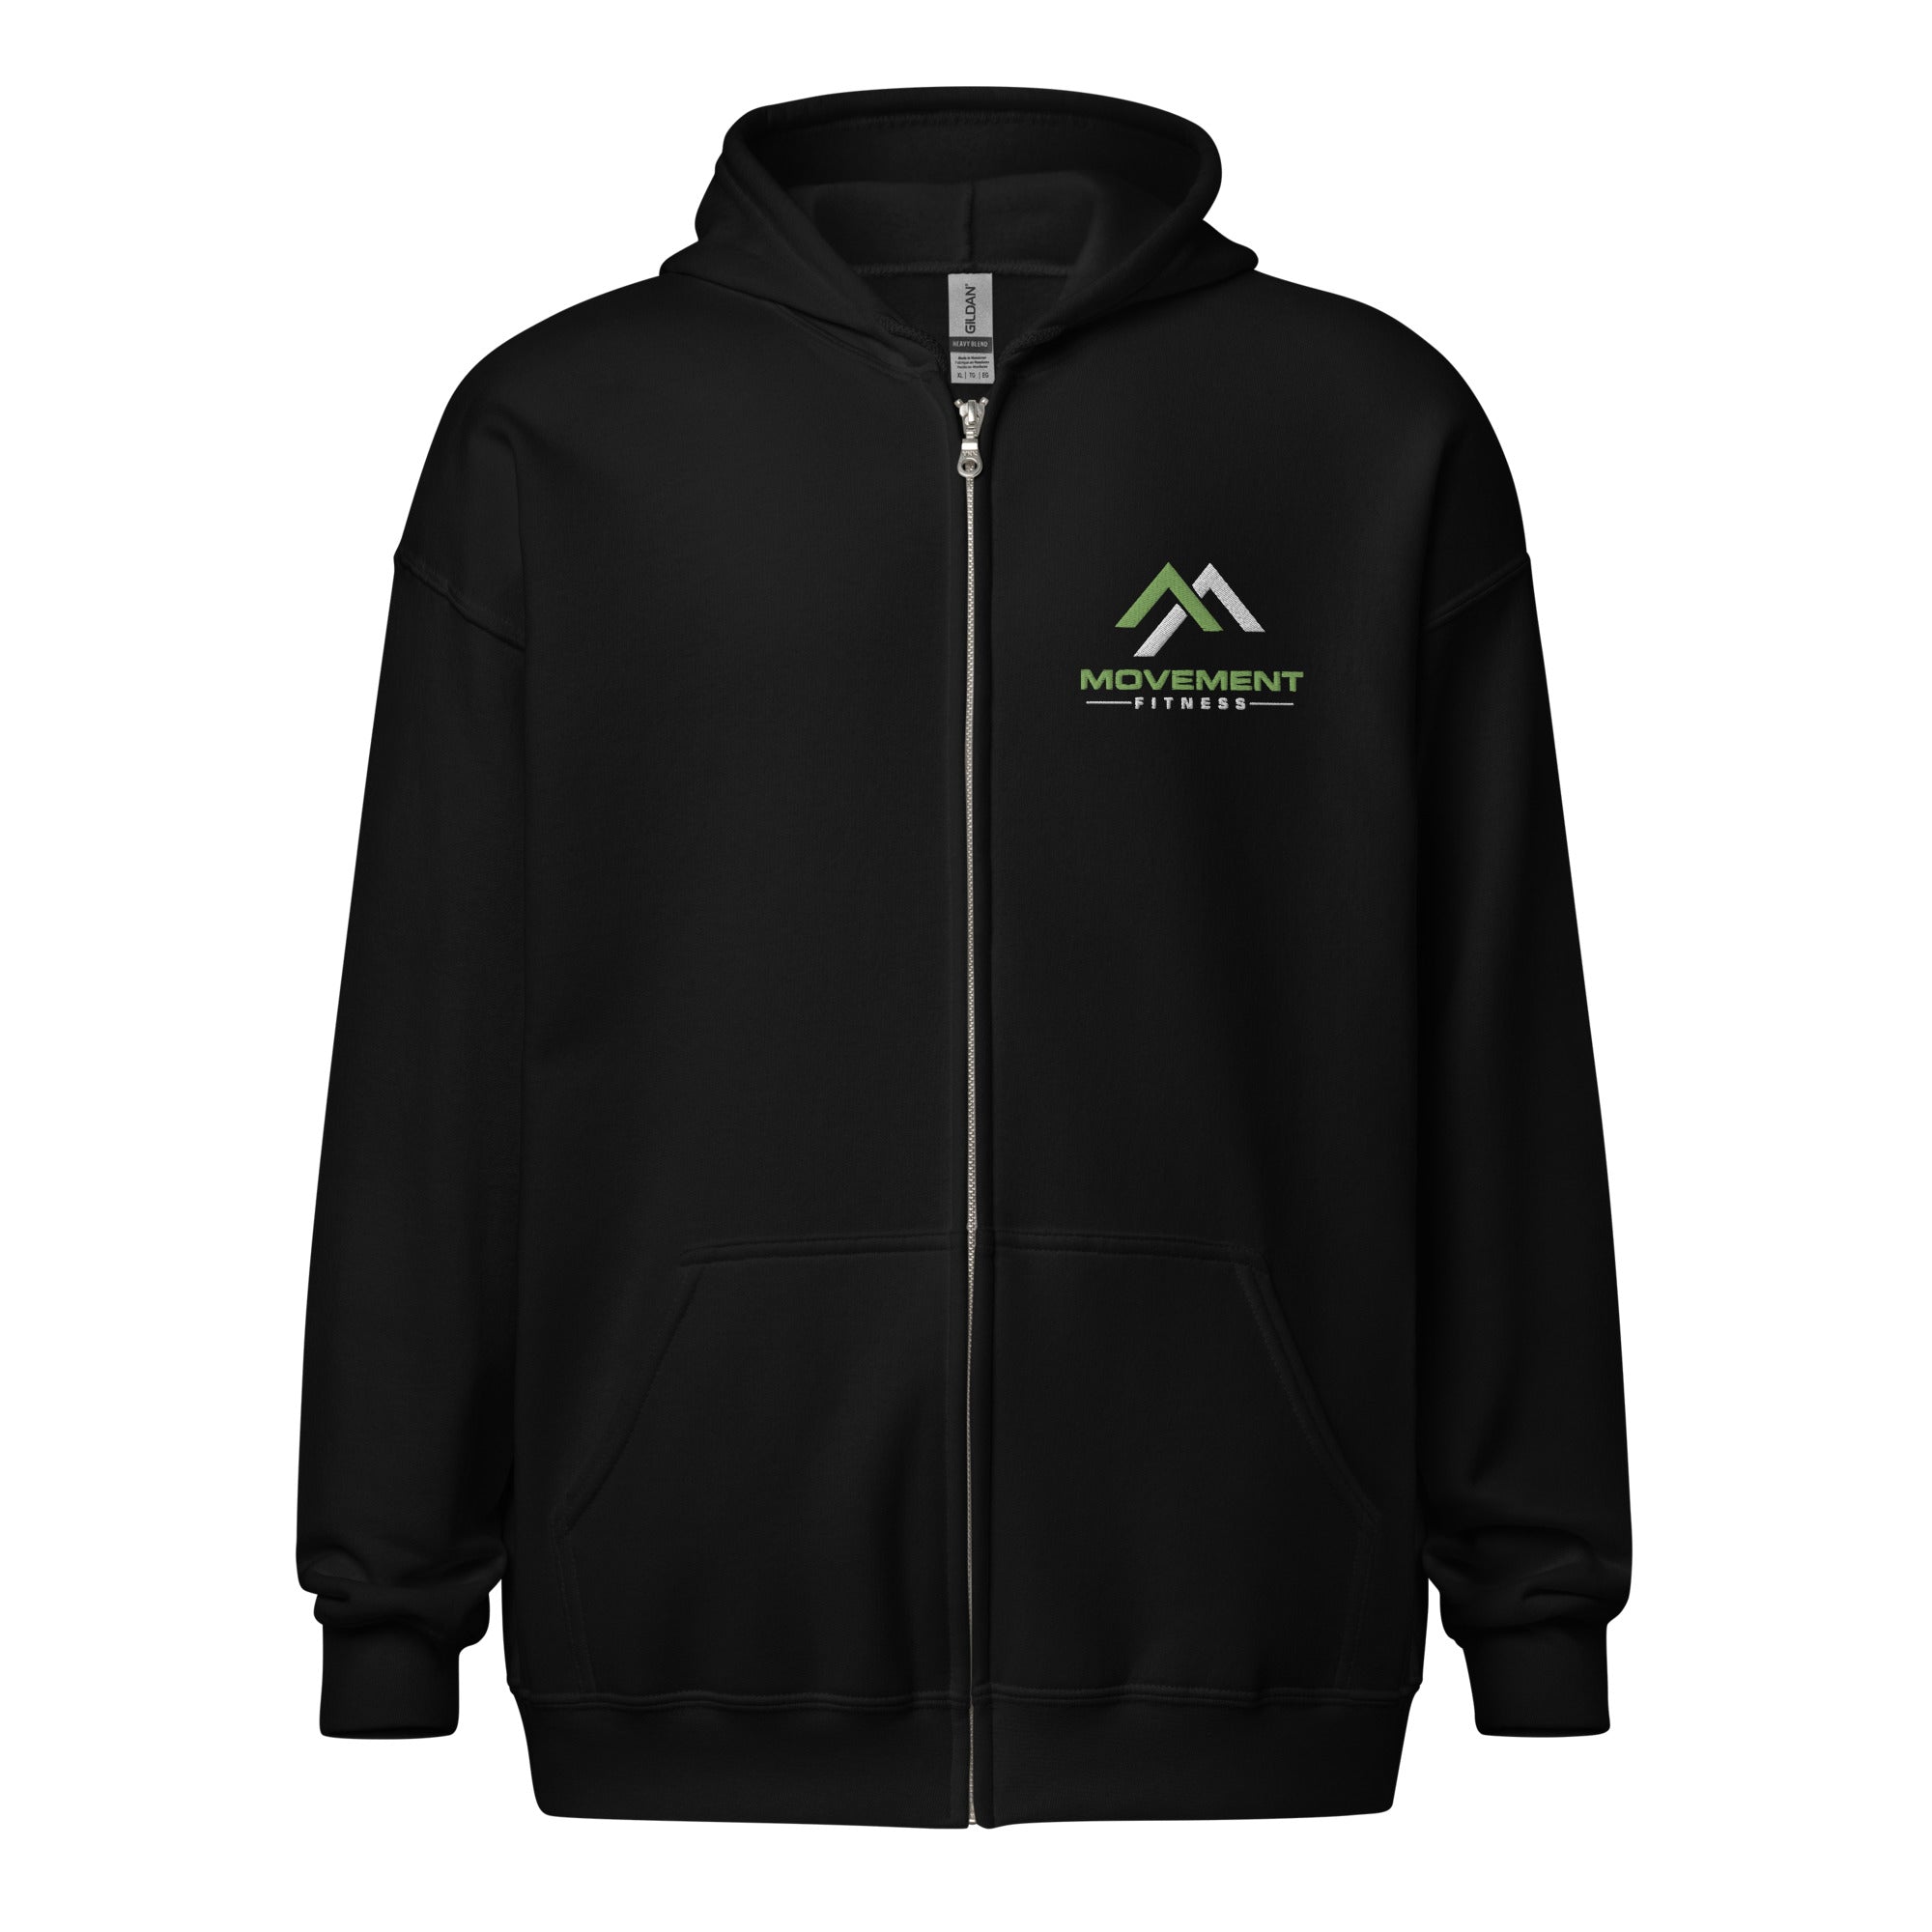 Full Zip Hoodie by Gildan  Artech Promotional Team and Event Apparel